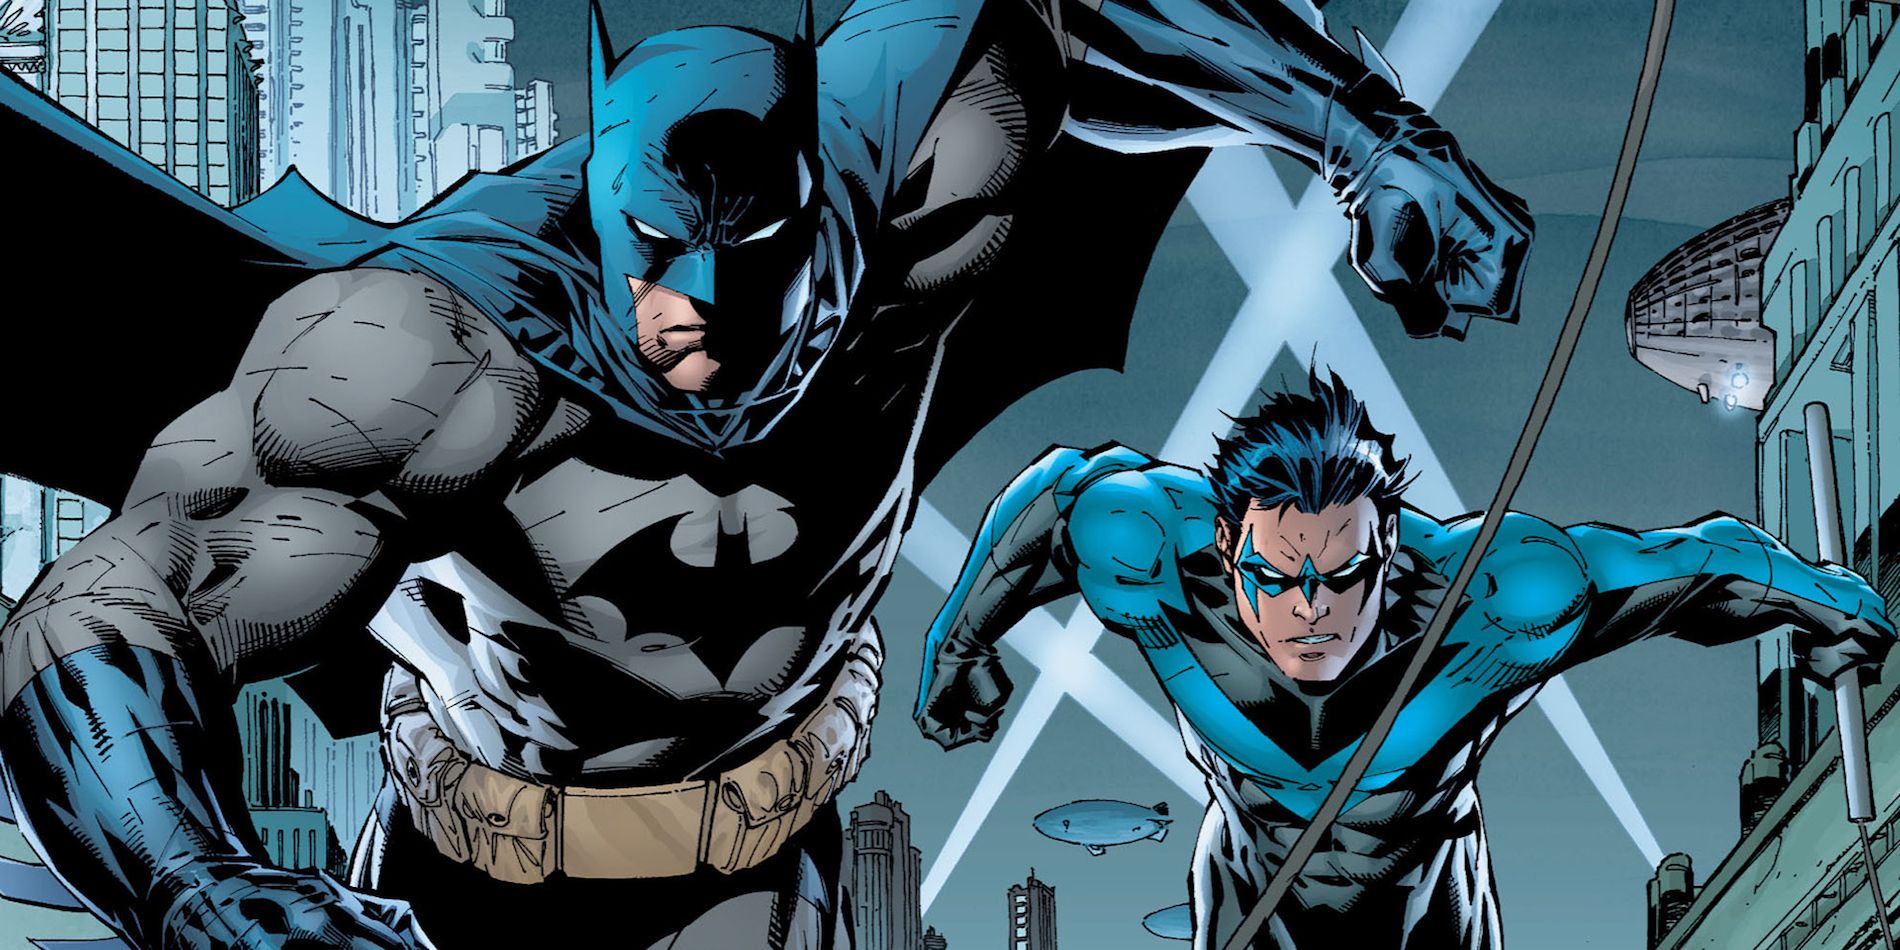 Nightwing and Batman by Jim Lee